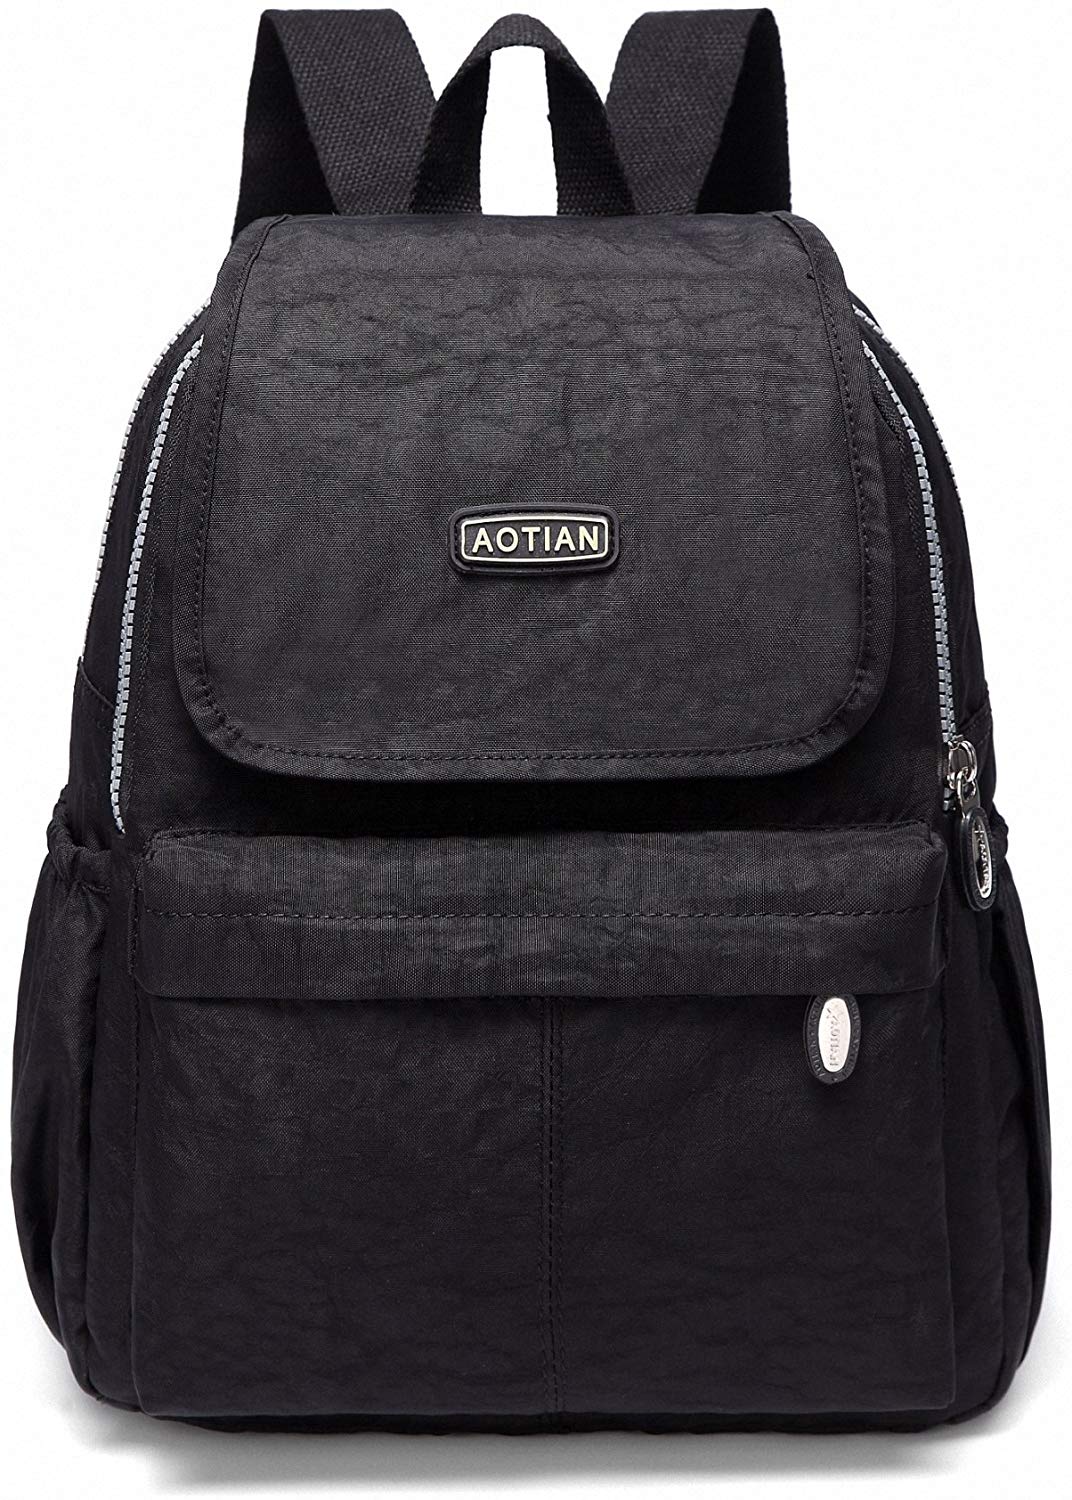 Top 4 Best Aotian Backpacks Review - Brand Review